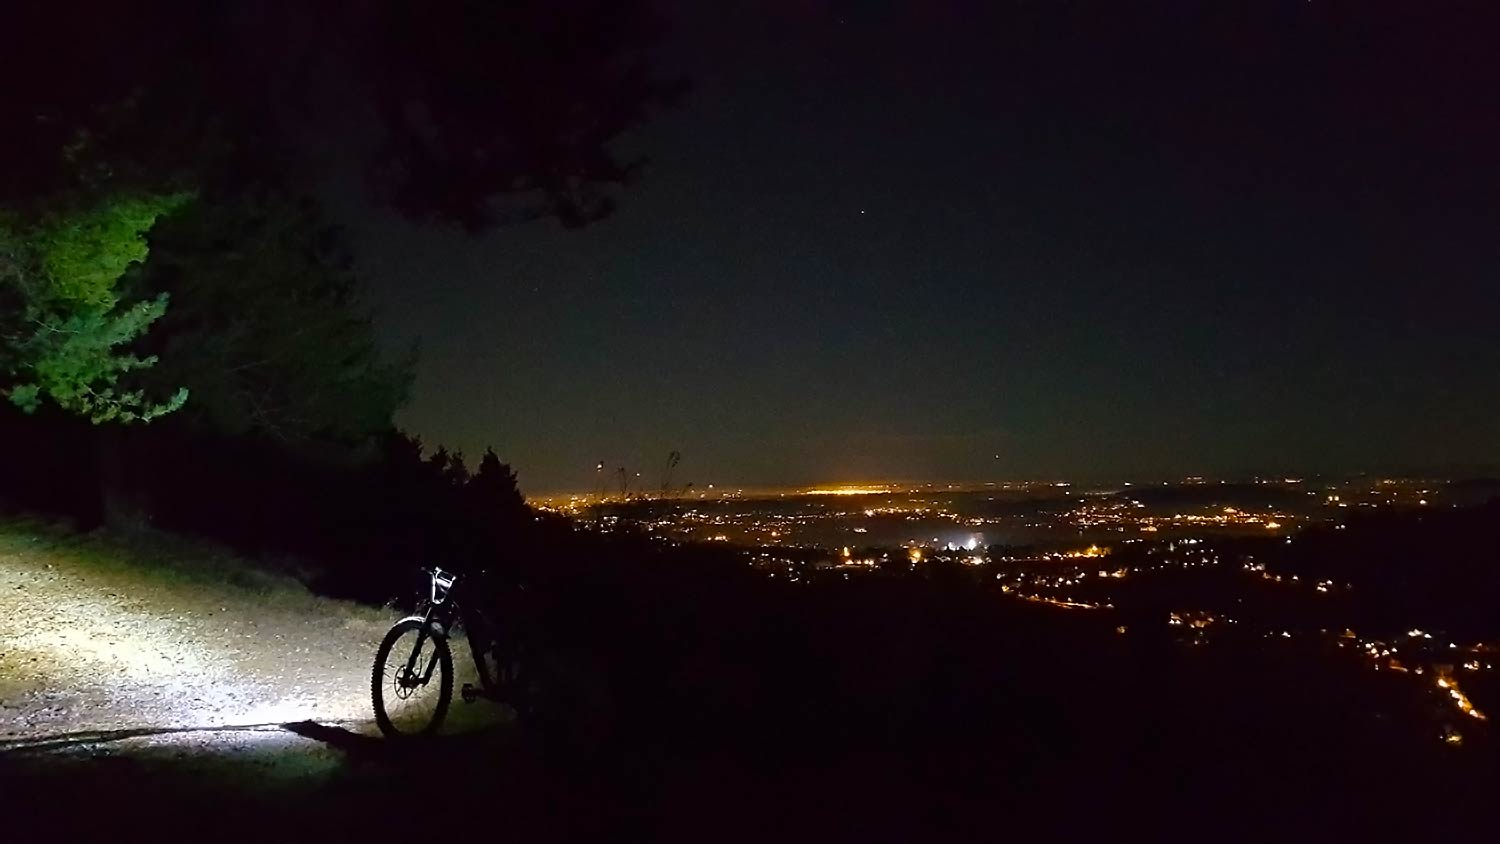 MTB trips: night riding on the Lakes Area